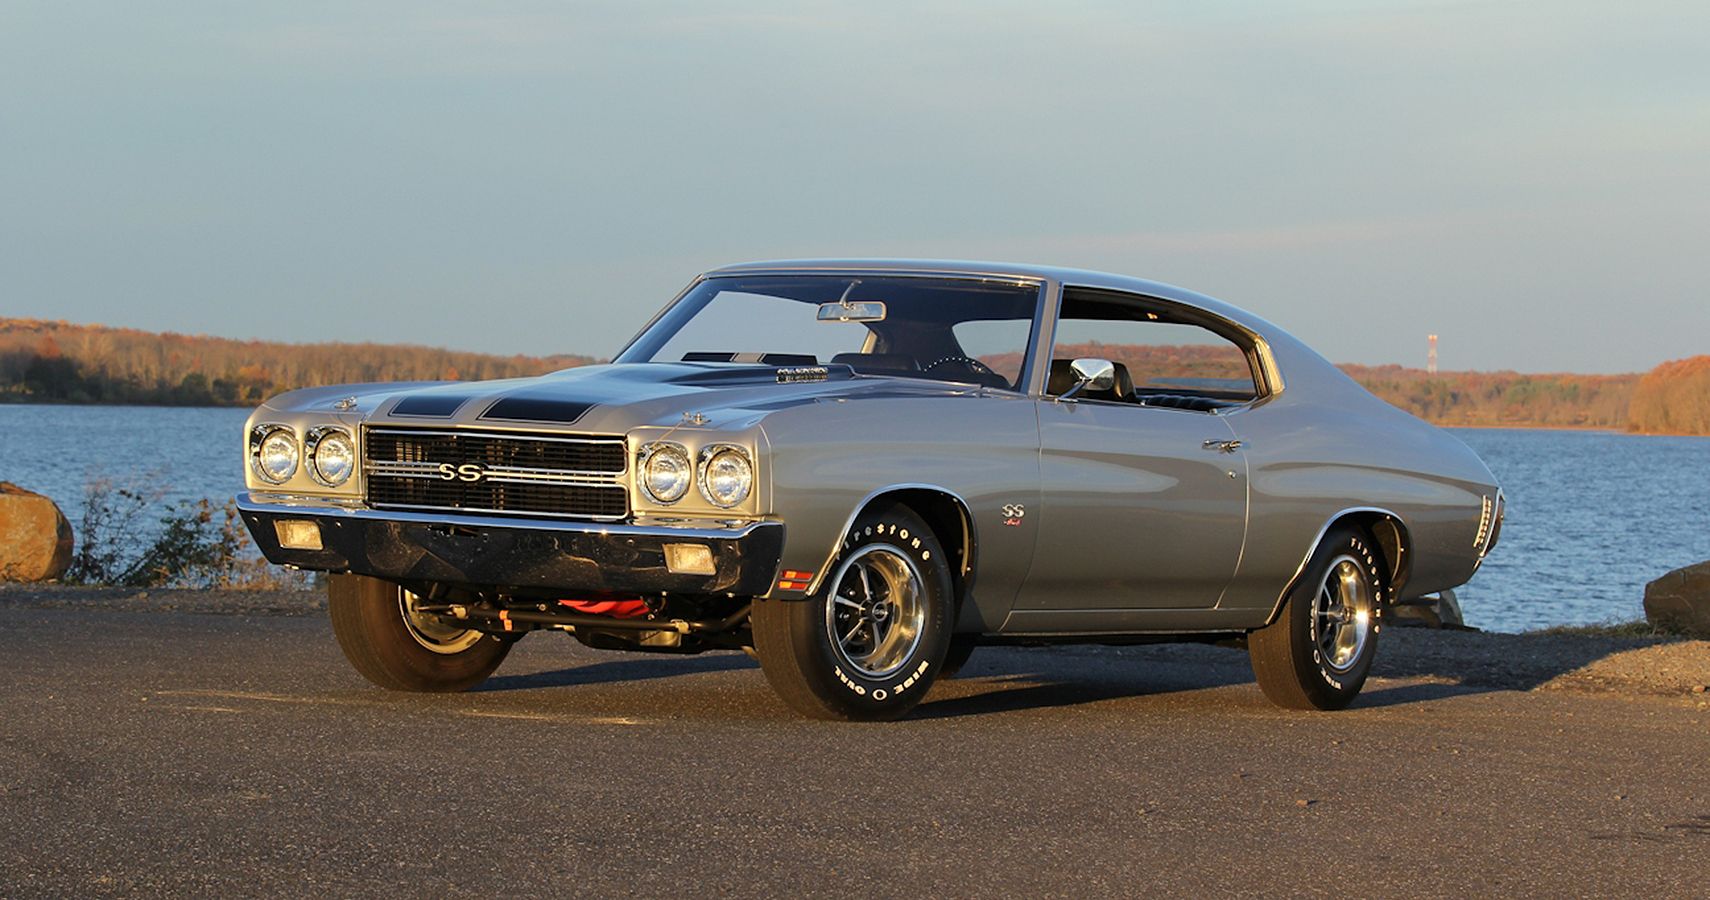 Let’s Power Up: 1970 Chevy Chevelle SS 454